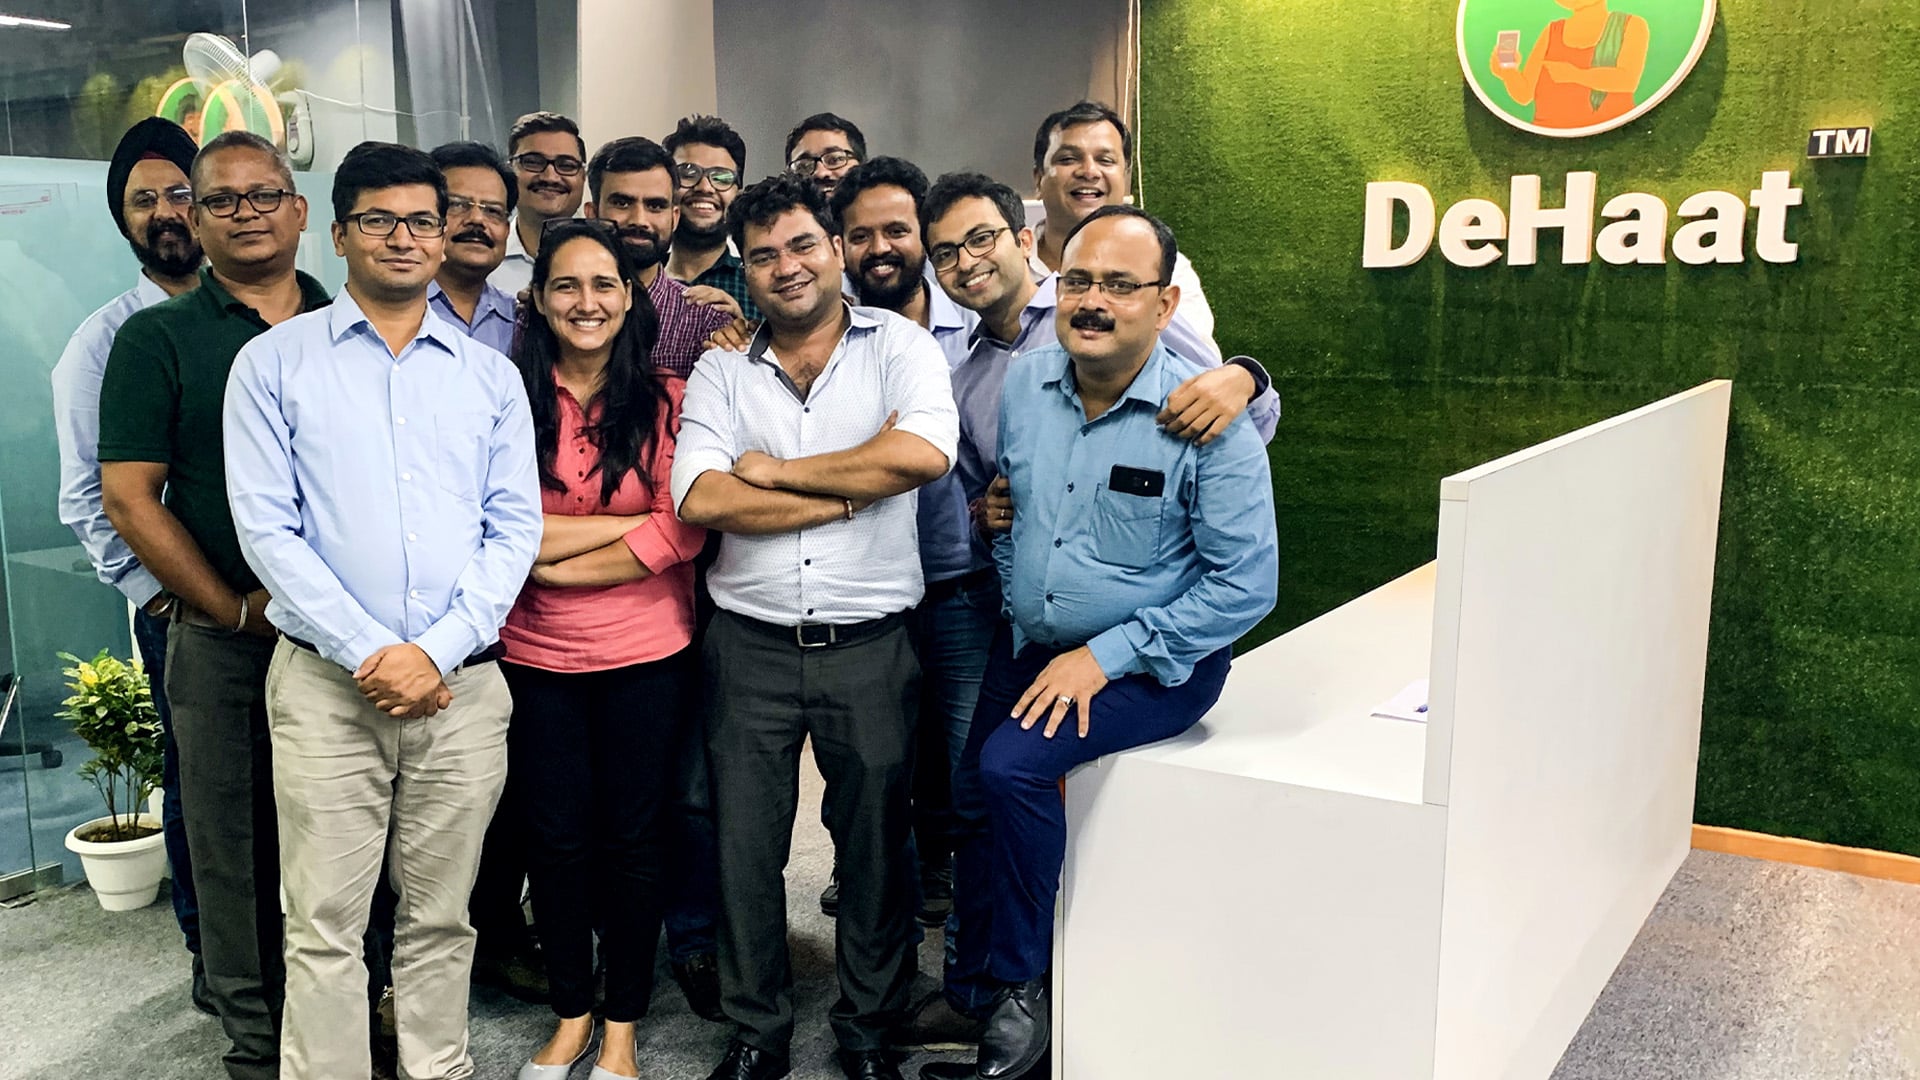 DeHaat raises USD 115 mn from investors for expansion, says company CEO